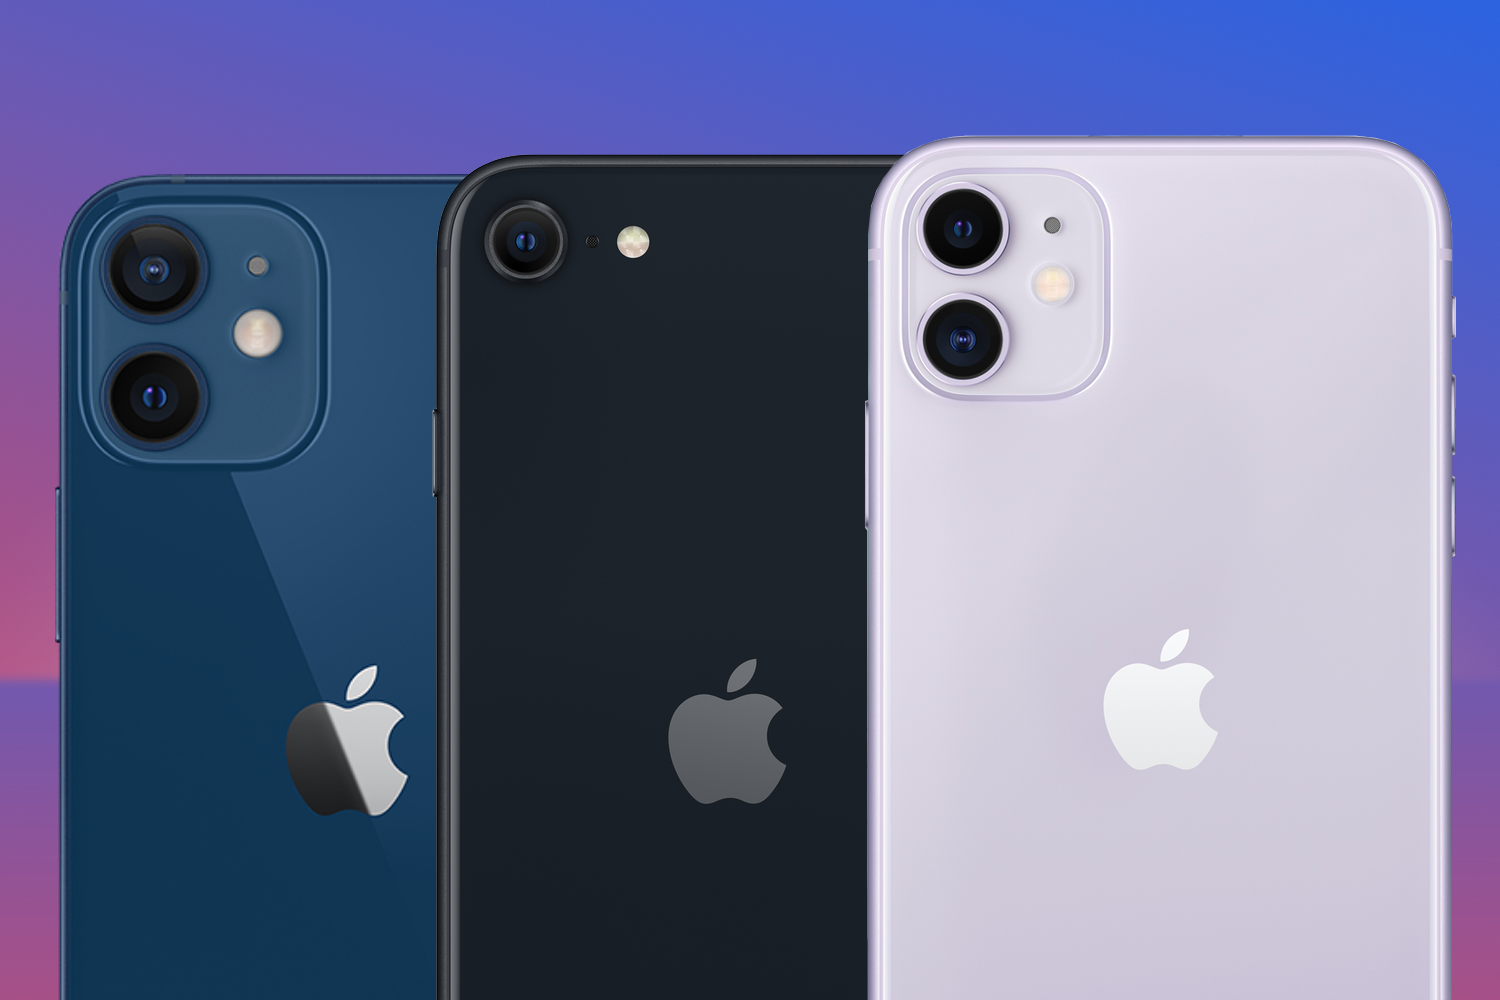 Which budget iPhone is right for you? Apple iPhone SE (2022) vs iPhone 12 Mini vs iPhone 11